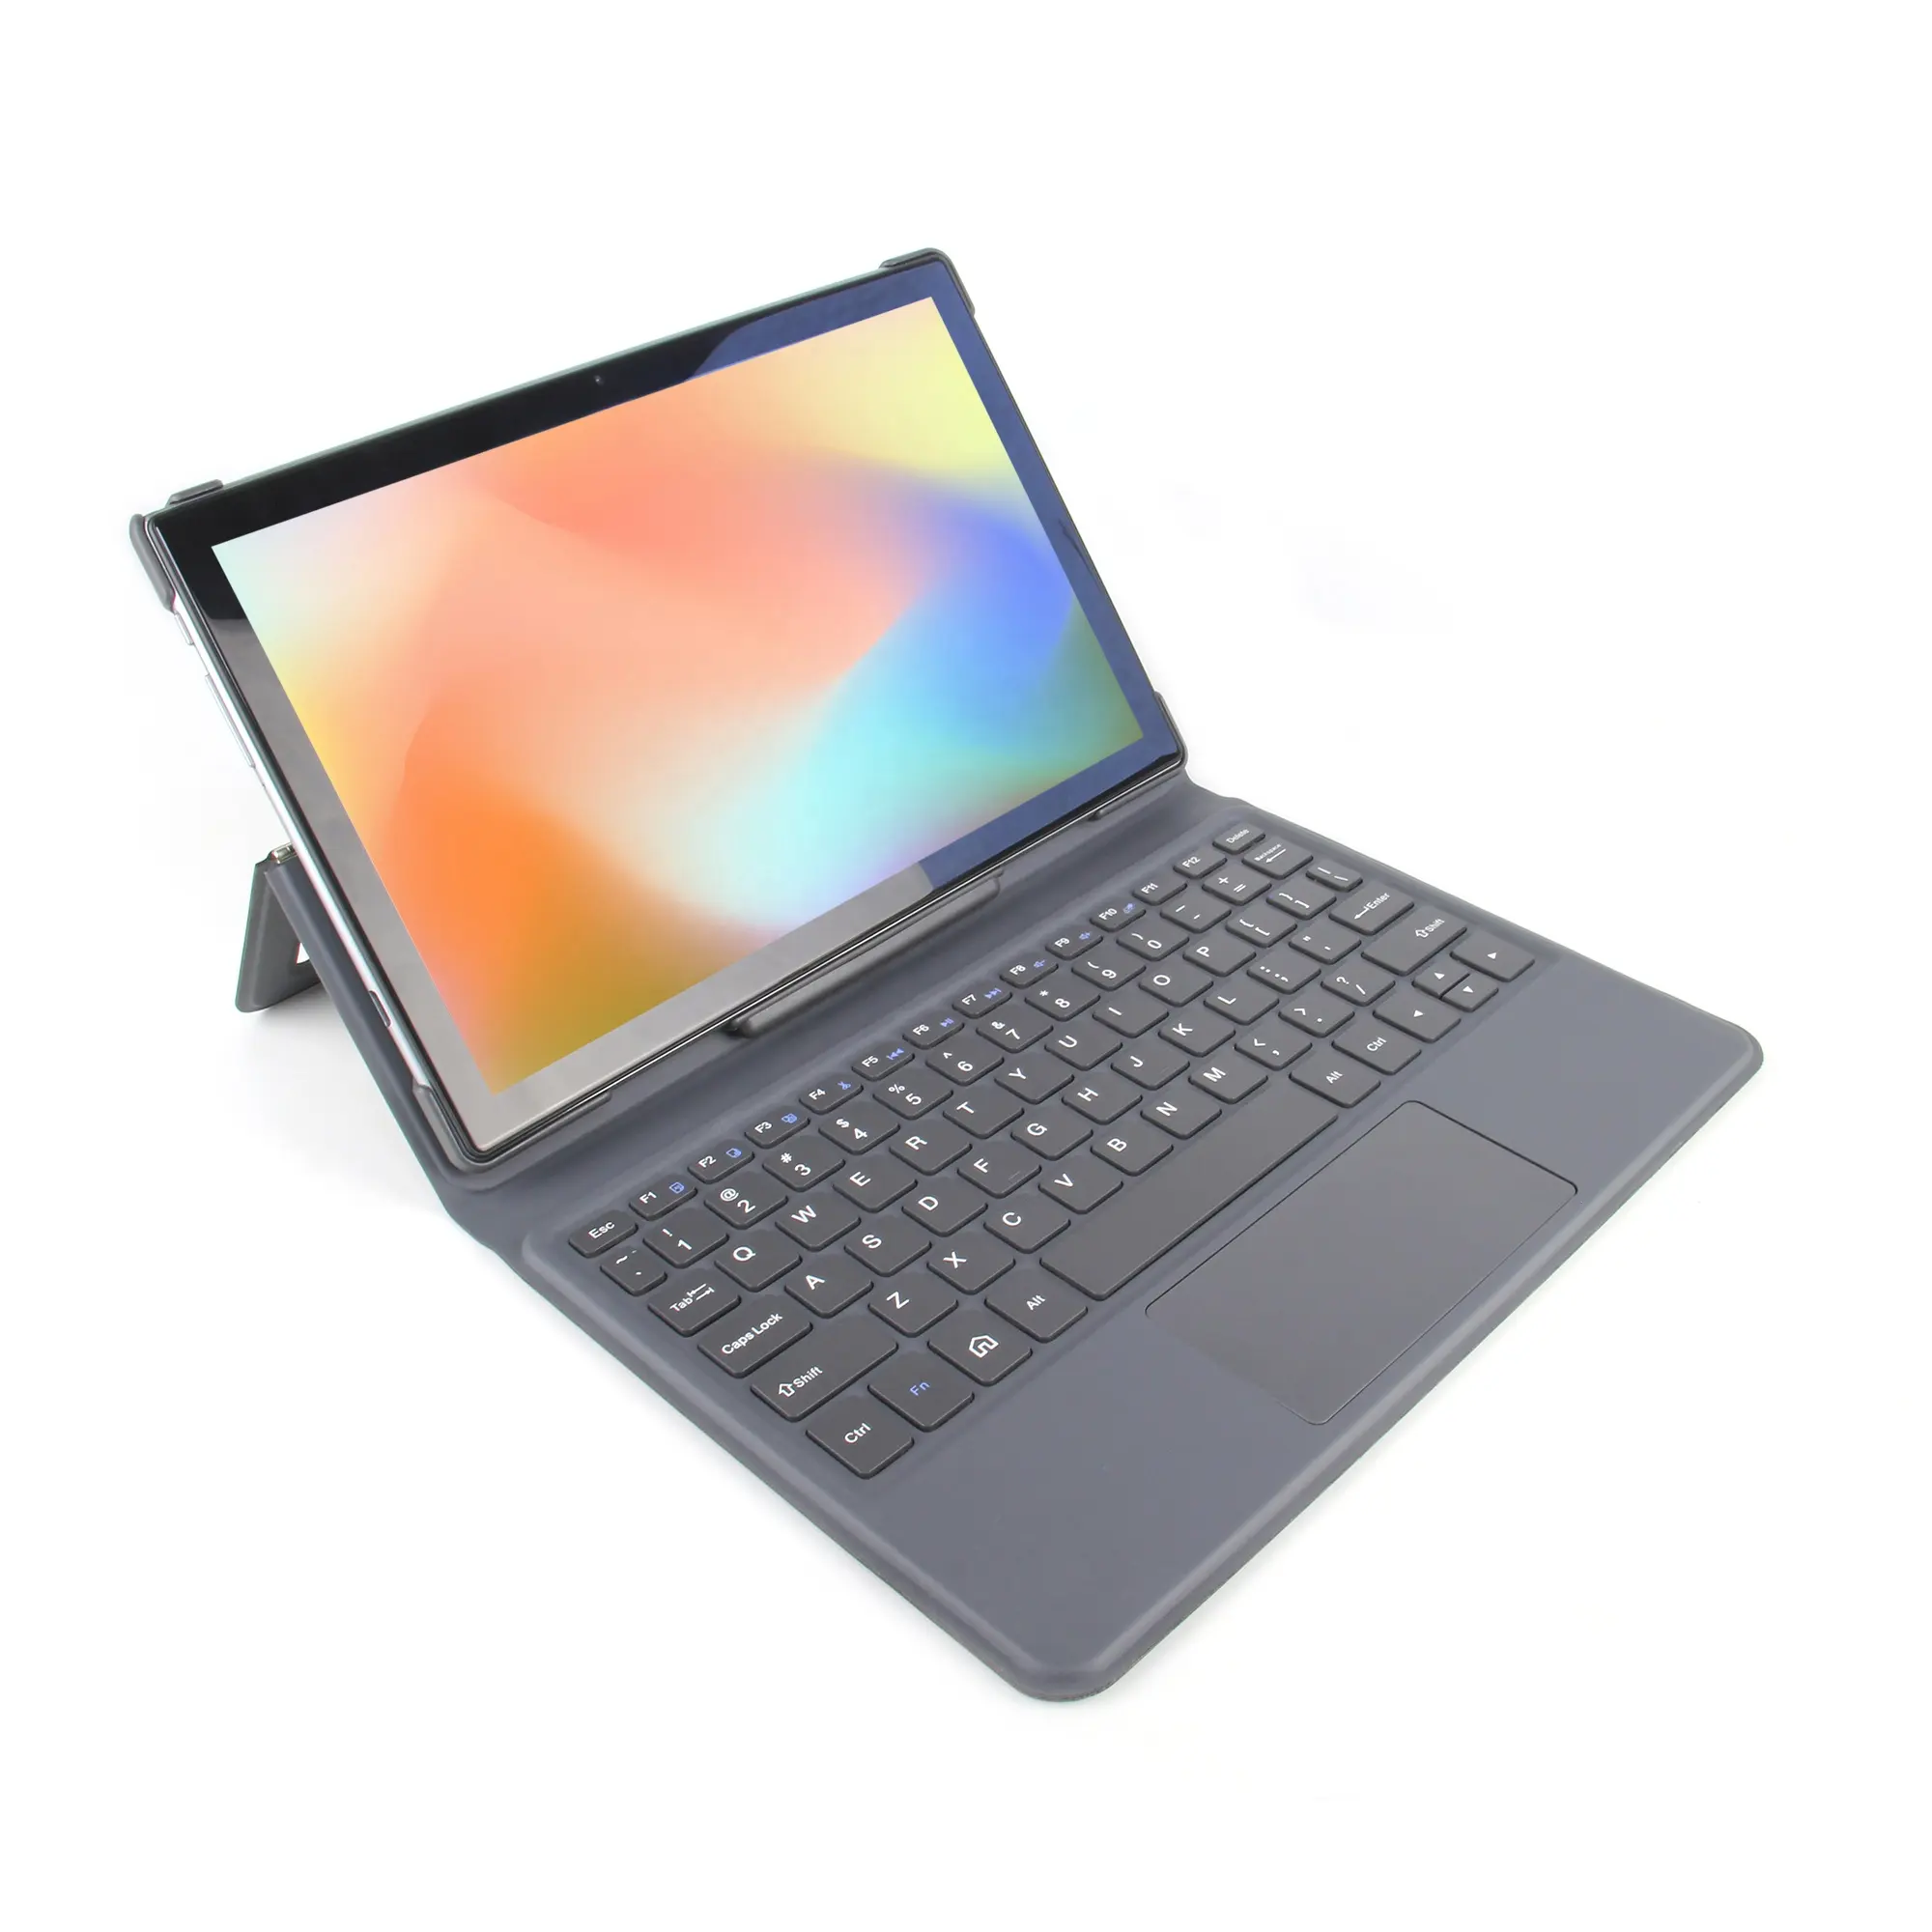 Tablet Pc Supplier Dual Band WiFi Tablet Pc 10 Inch 32gb Android Tablet Pc With 800*1280 IPS 10 Inch Tablet With Detachable Keyboard